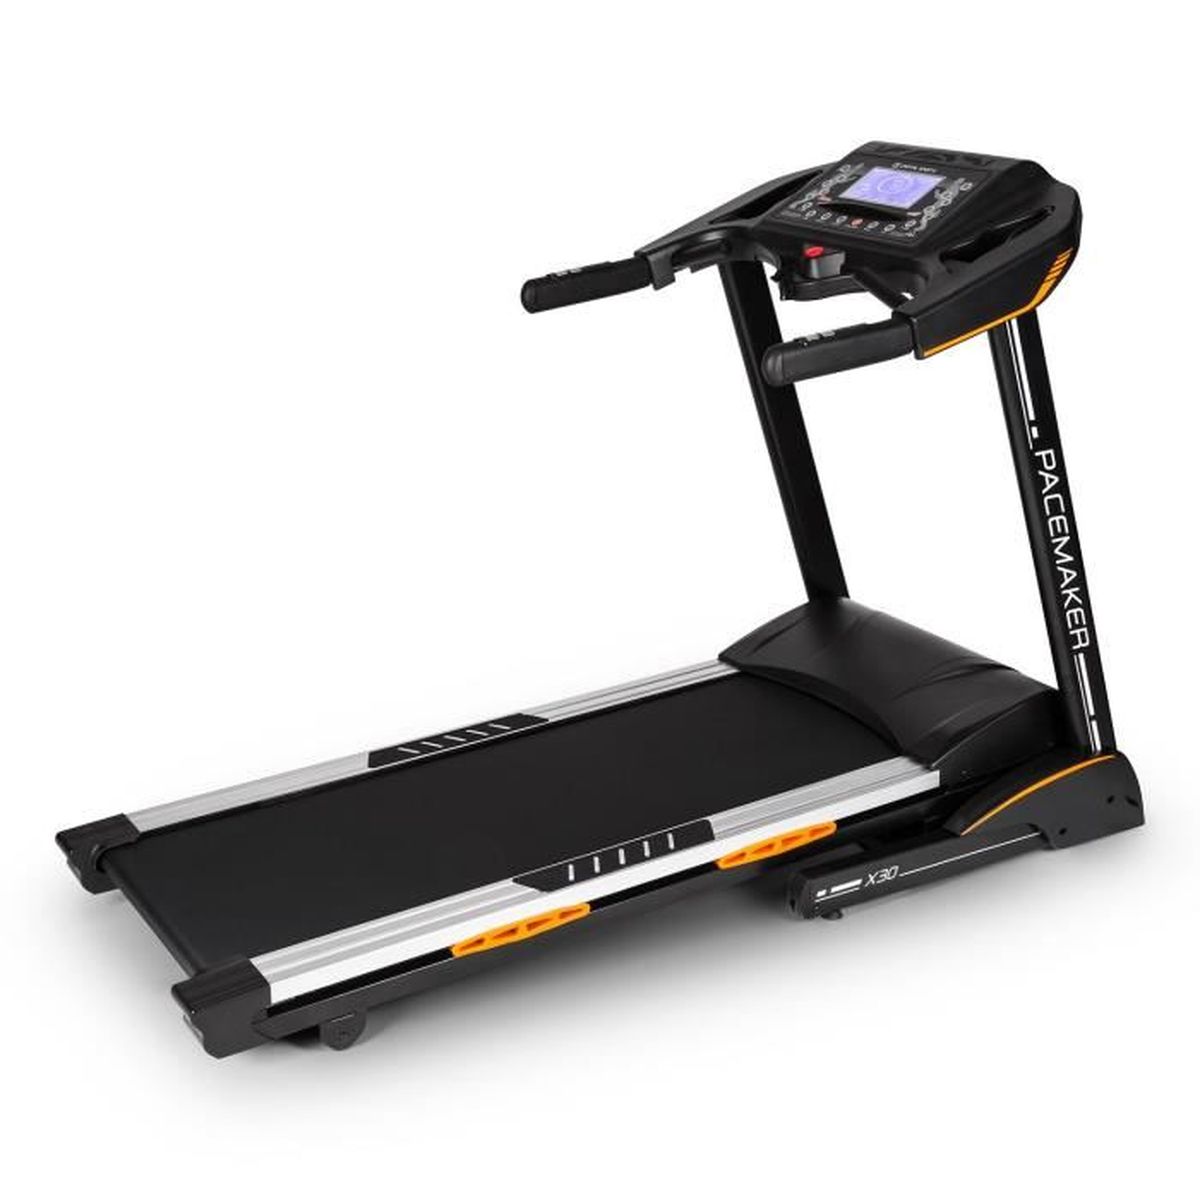 Capital Sports Pacemaker X30 Tapis Roulant 